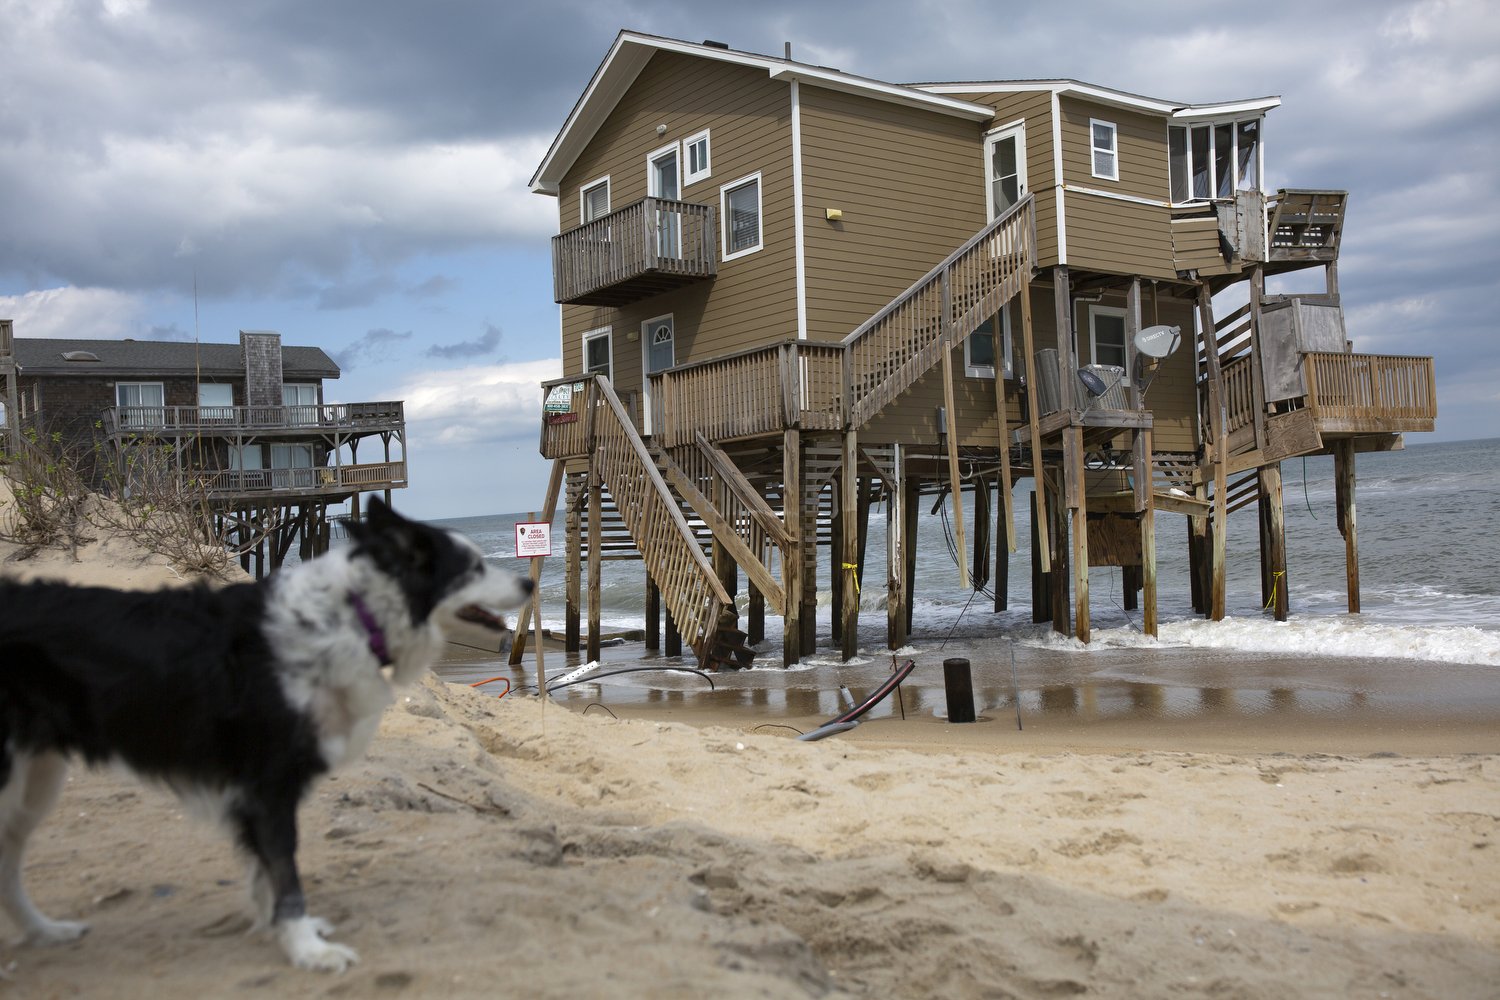  A house along the beach on Ocean Drive in Rodanthe, North Carolina is in imminent danger of falling into the sea. Residents are trying to find ways to mitigate future damage but one of the countyÕs main goals during beach nourishment projects is to 